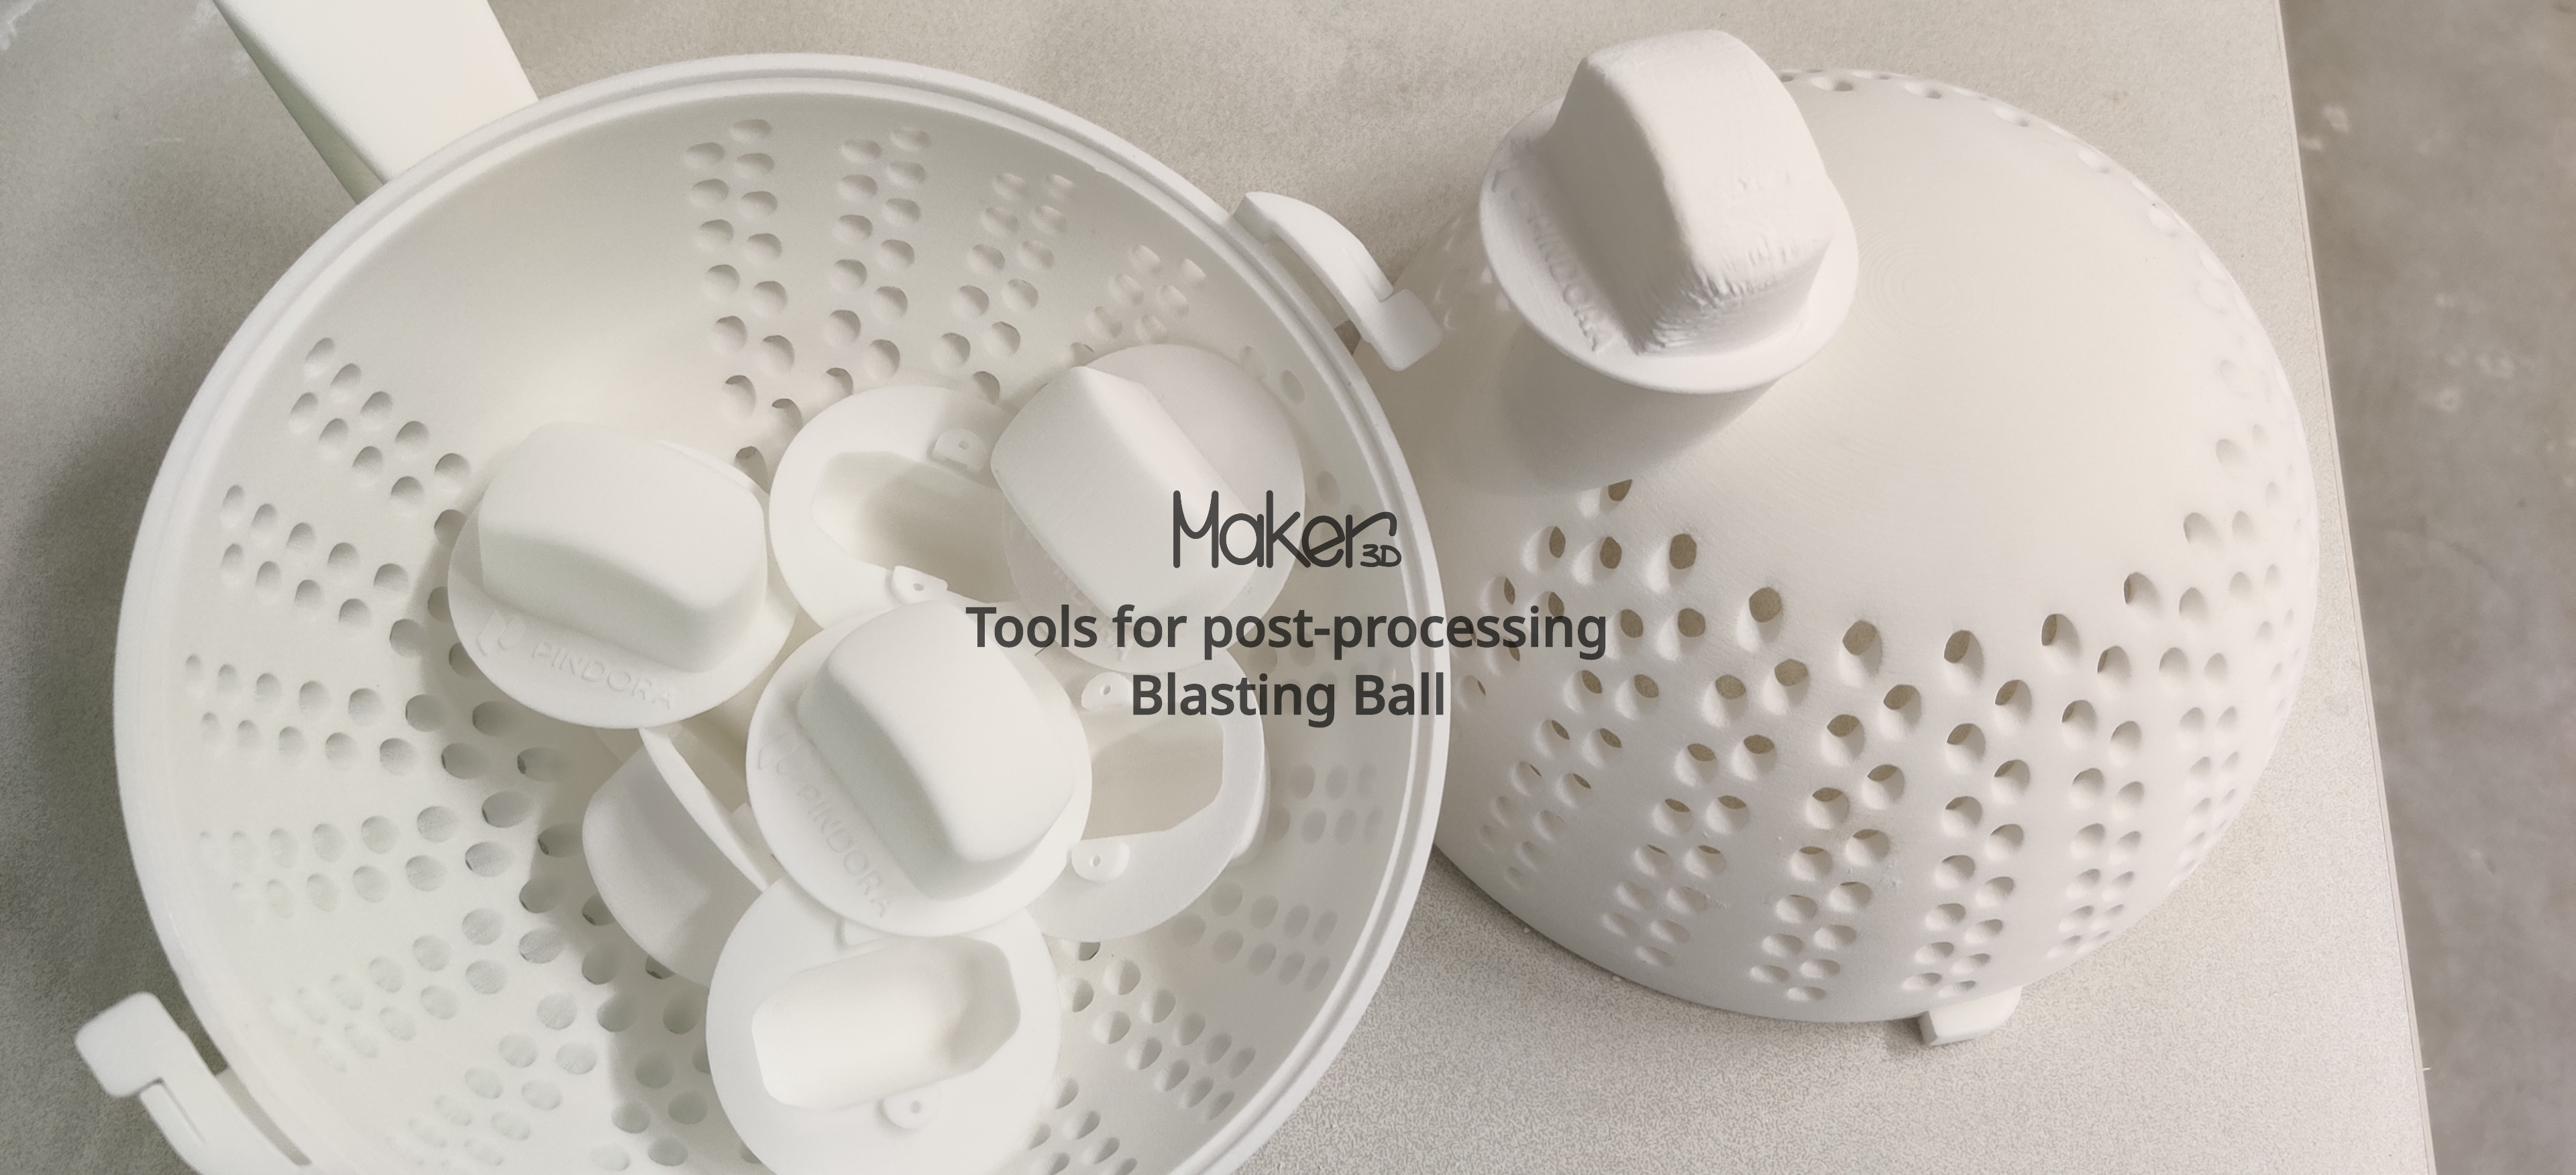 TOOLS FOR POST-PROCESSING – BLASTING BALL